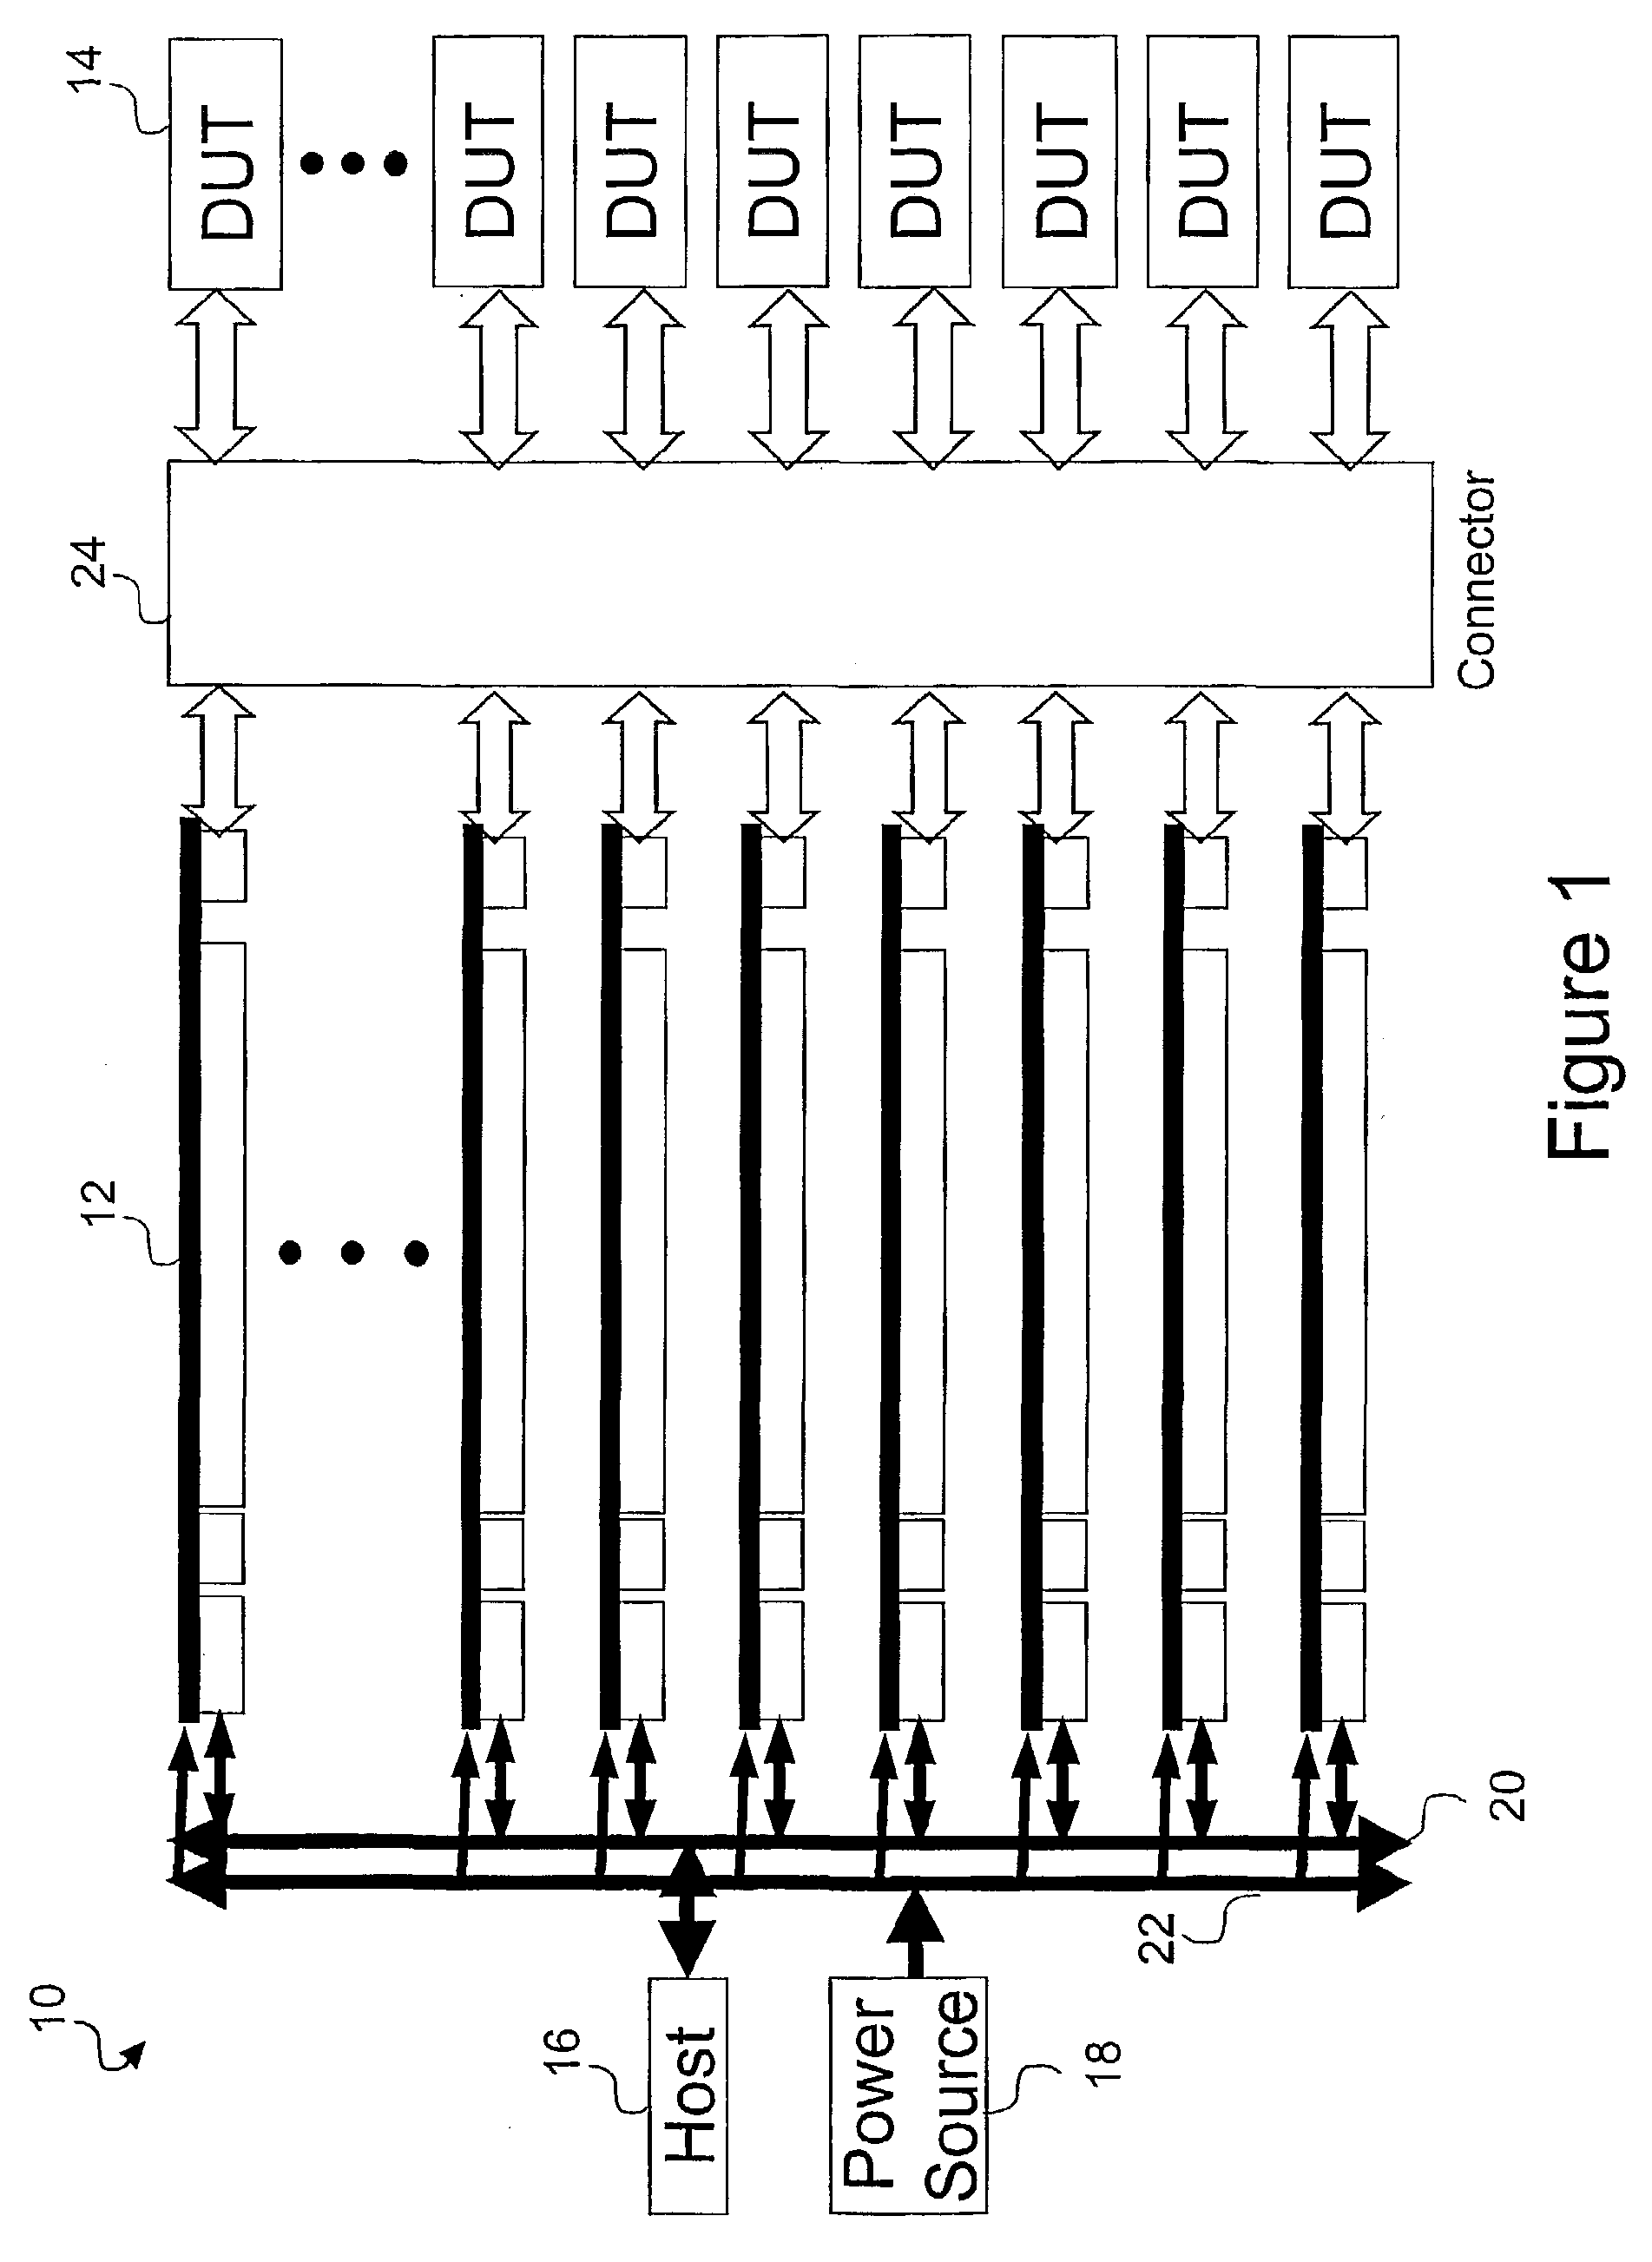 Method and system for wafer and device level testing of an integrated circuit